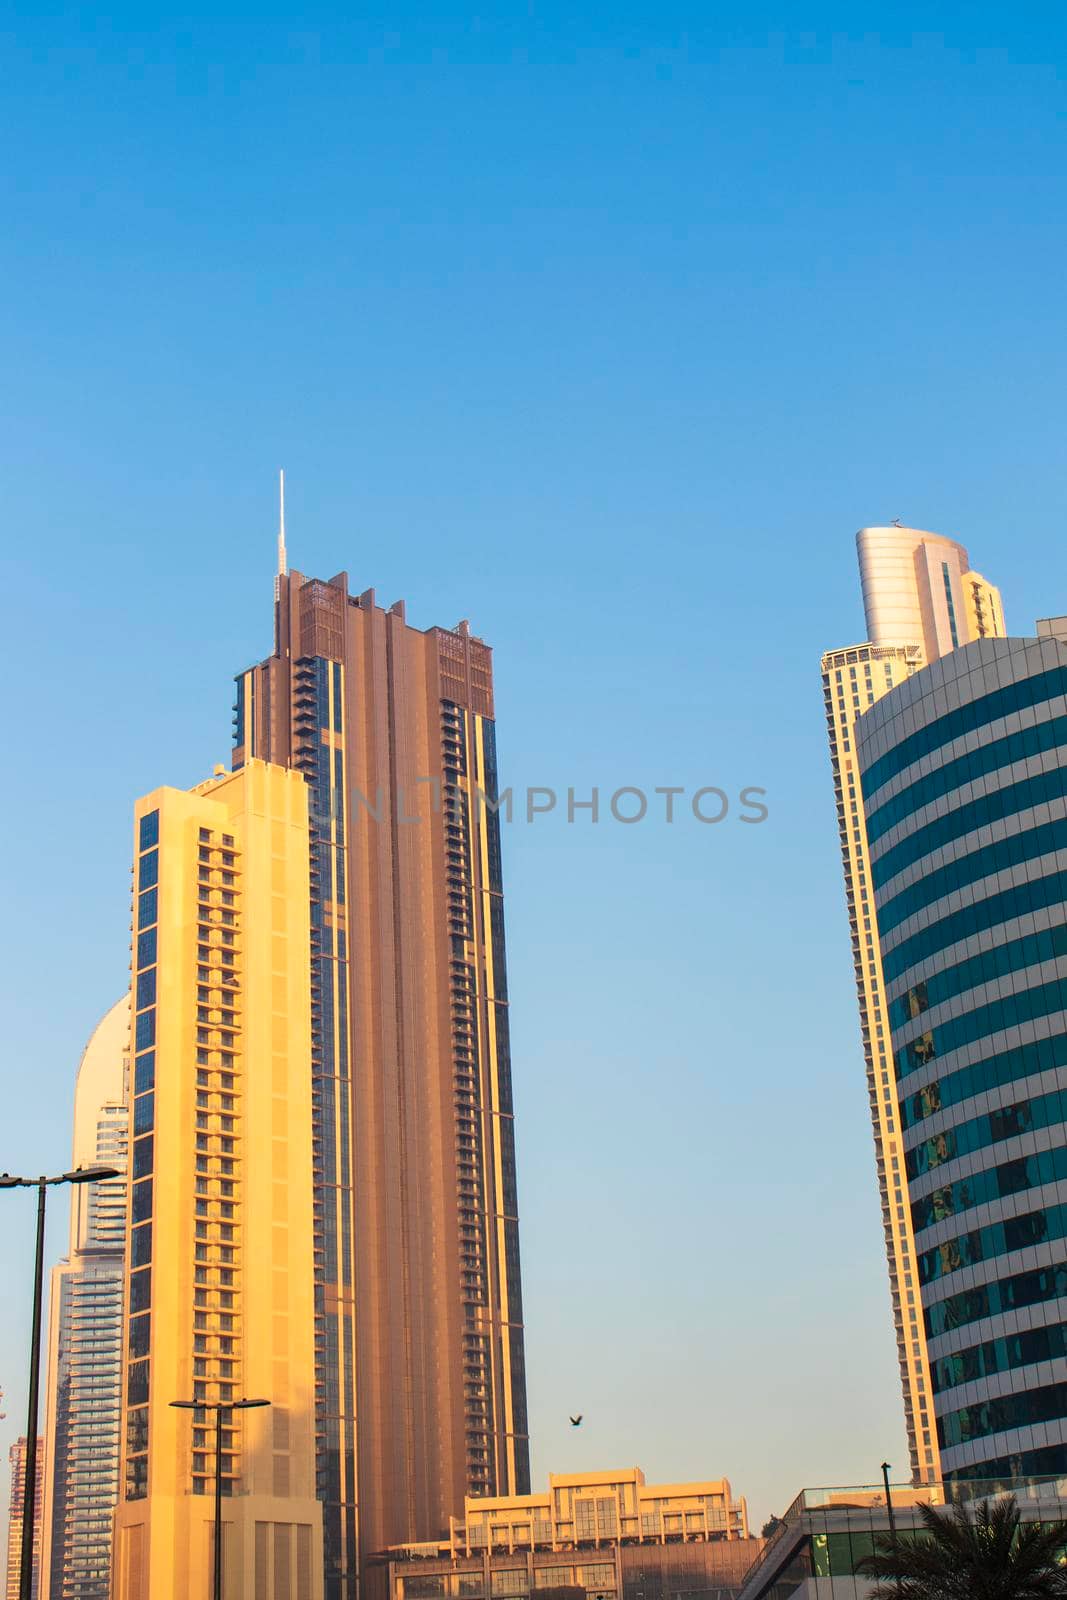 Dubai, UAE - 01.15.2021 Morning hour in Business bay district , Marasi drive. Burj Khalifa, tallest building in the world can be seen in the scene. Outdoors by pazemin